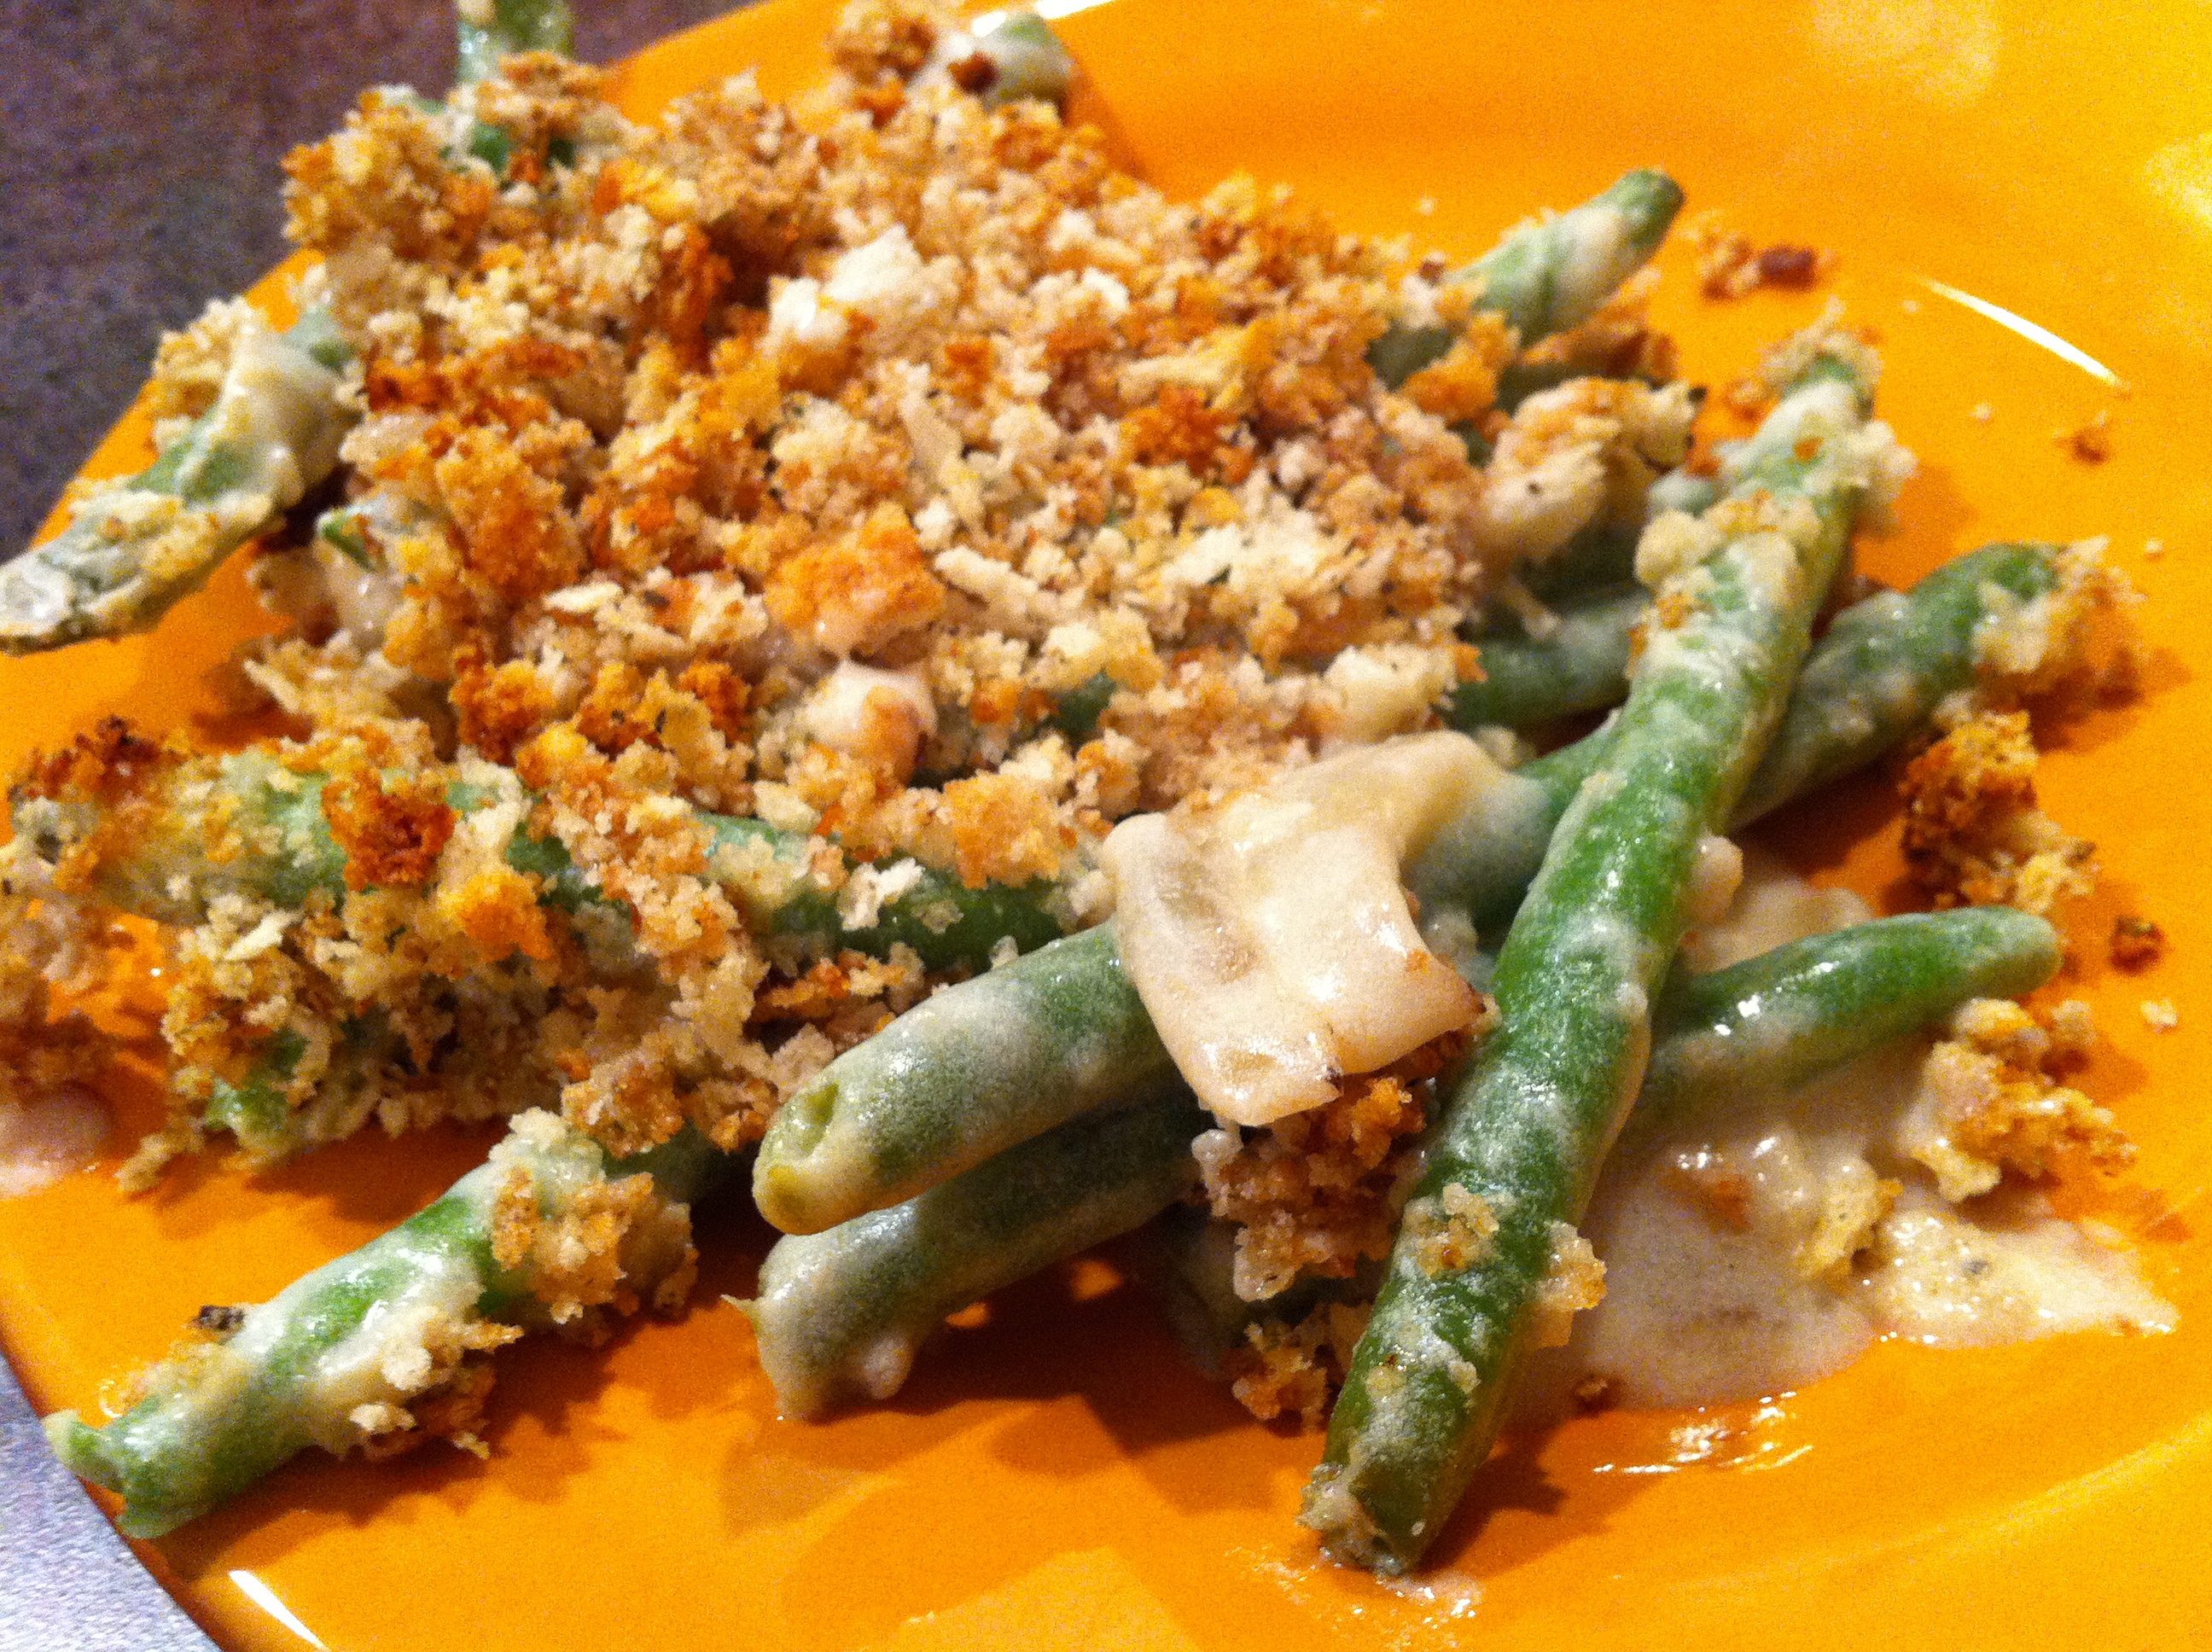 Meal Makeover: Green Bean Casserole | The Realistic Nutritionist